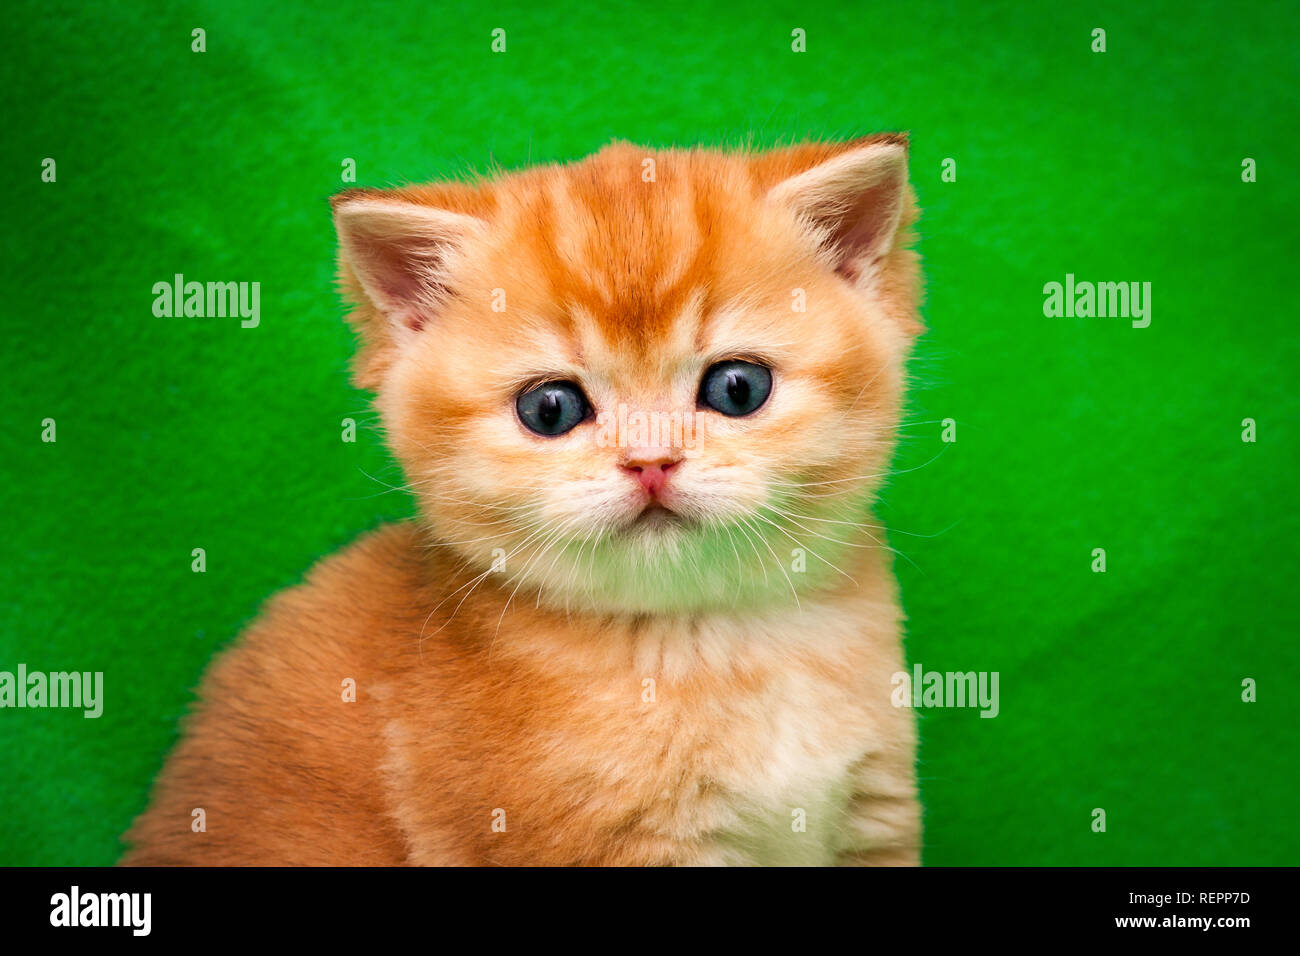 Portrait of a cute golden british kitten close-up, the muzzle of a red kitten with a pink nose that looks into the camera Stock Photo